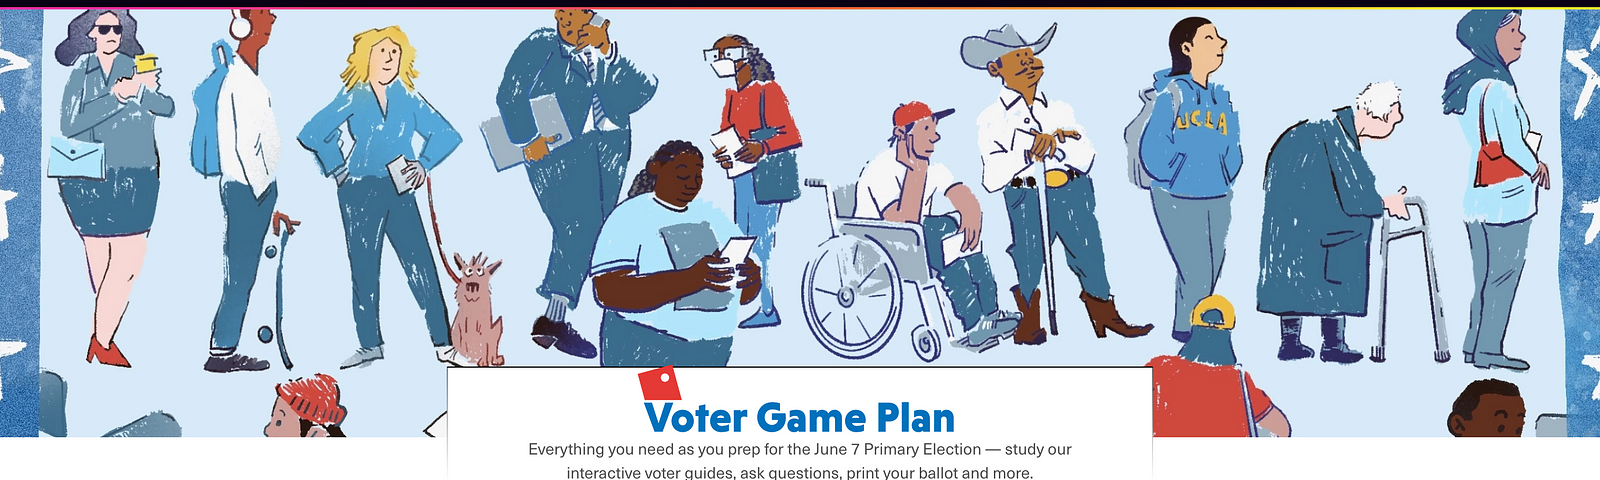 A screenshot of a website landing page. At the top is a black-and-white “LAist” logo and an illustration of several people standing on a street, presumably waiting in line to vote. The title reads: “Voter Game Plan.” The description underneath: “Everything you need as you prep for the June 7 Primary Election — study our interactive voter guides, ask questions, print your ballot and more.” Below that are three header links, reading: “Explore Our Guides,” “Ask Us Questions,” and “Get Your Ballot.”